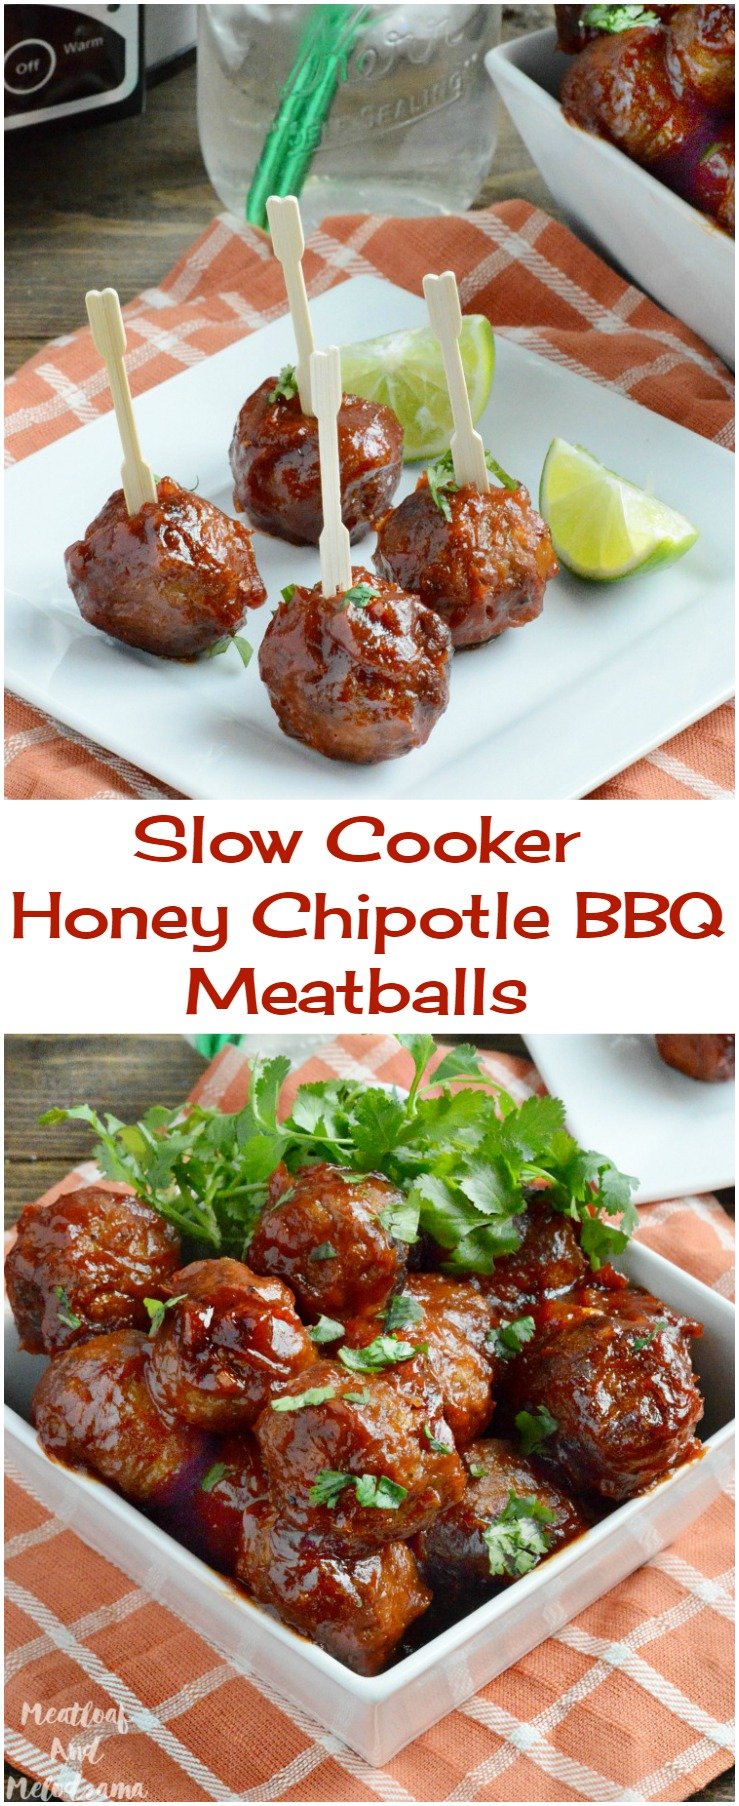 Slow Cooker Honey Chipotle BBQ Meatballs - Meatloaf and ...